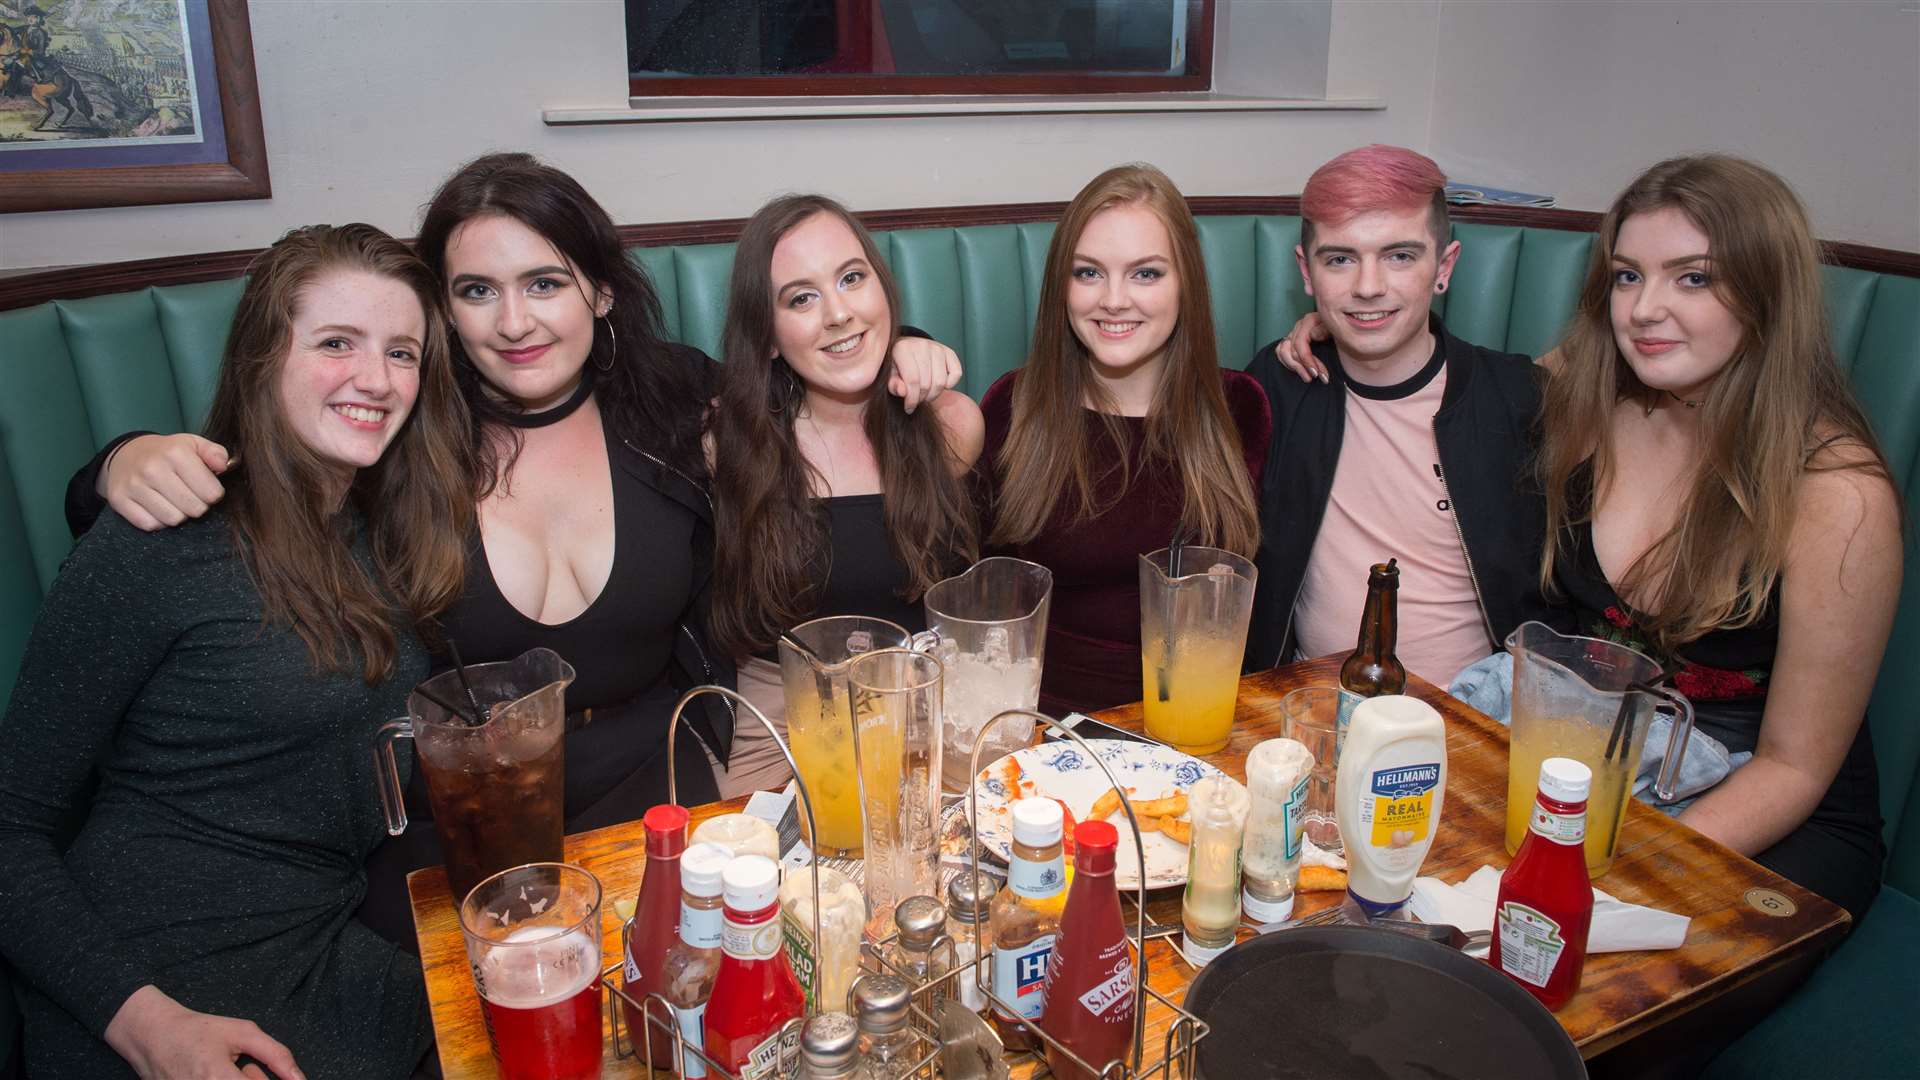 Meal and drinks for (left to right) Fiona Reid, Sophie Brown, Ruth Olivant, Kirsty Robertson, Matt Thornton and Ellen "MacGremlin" Macdonald